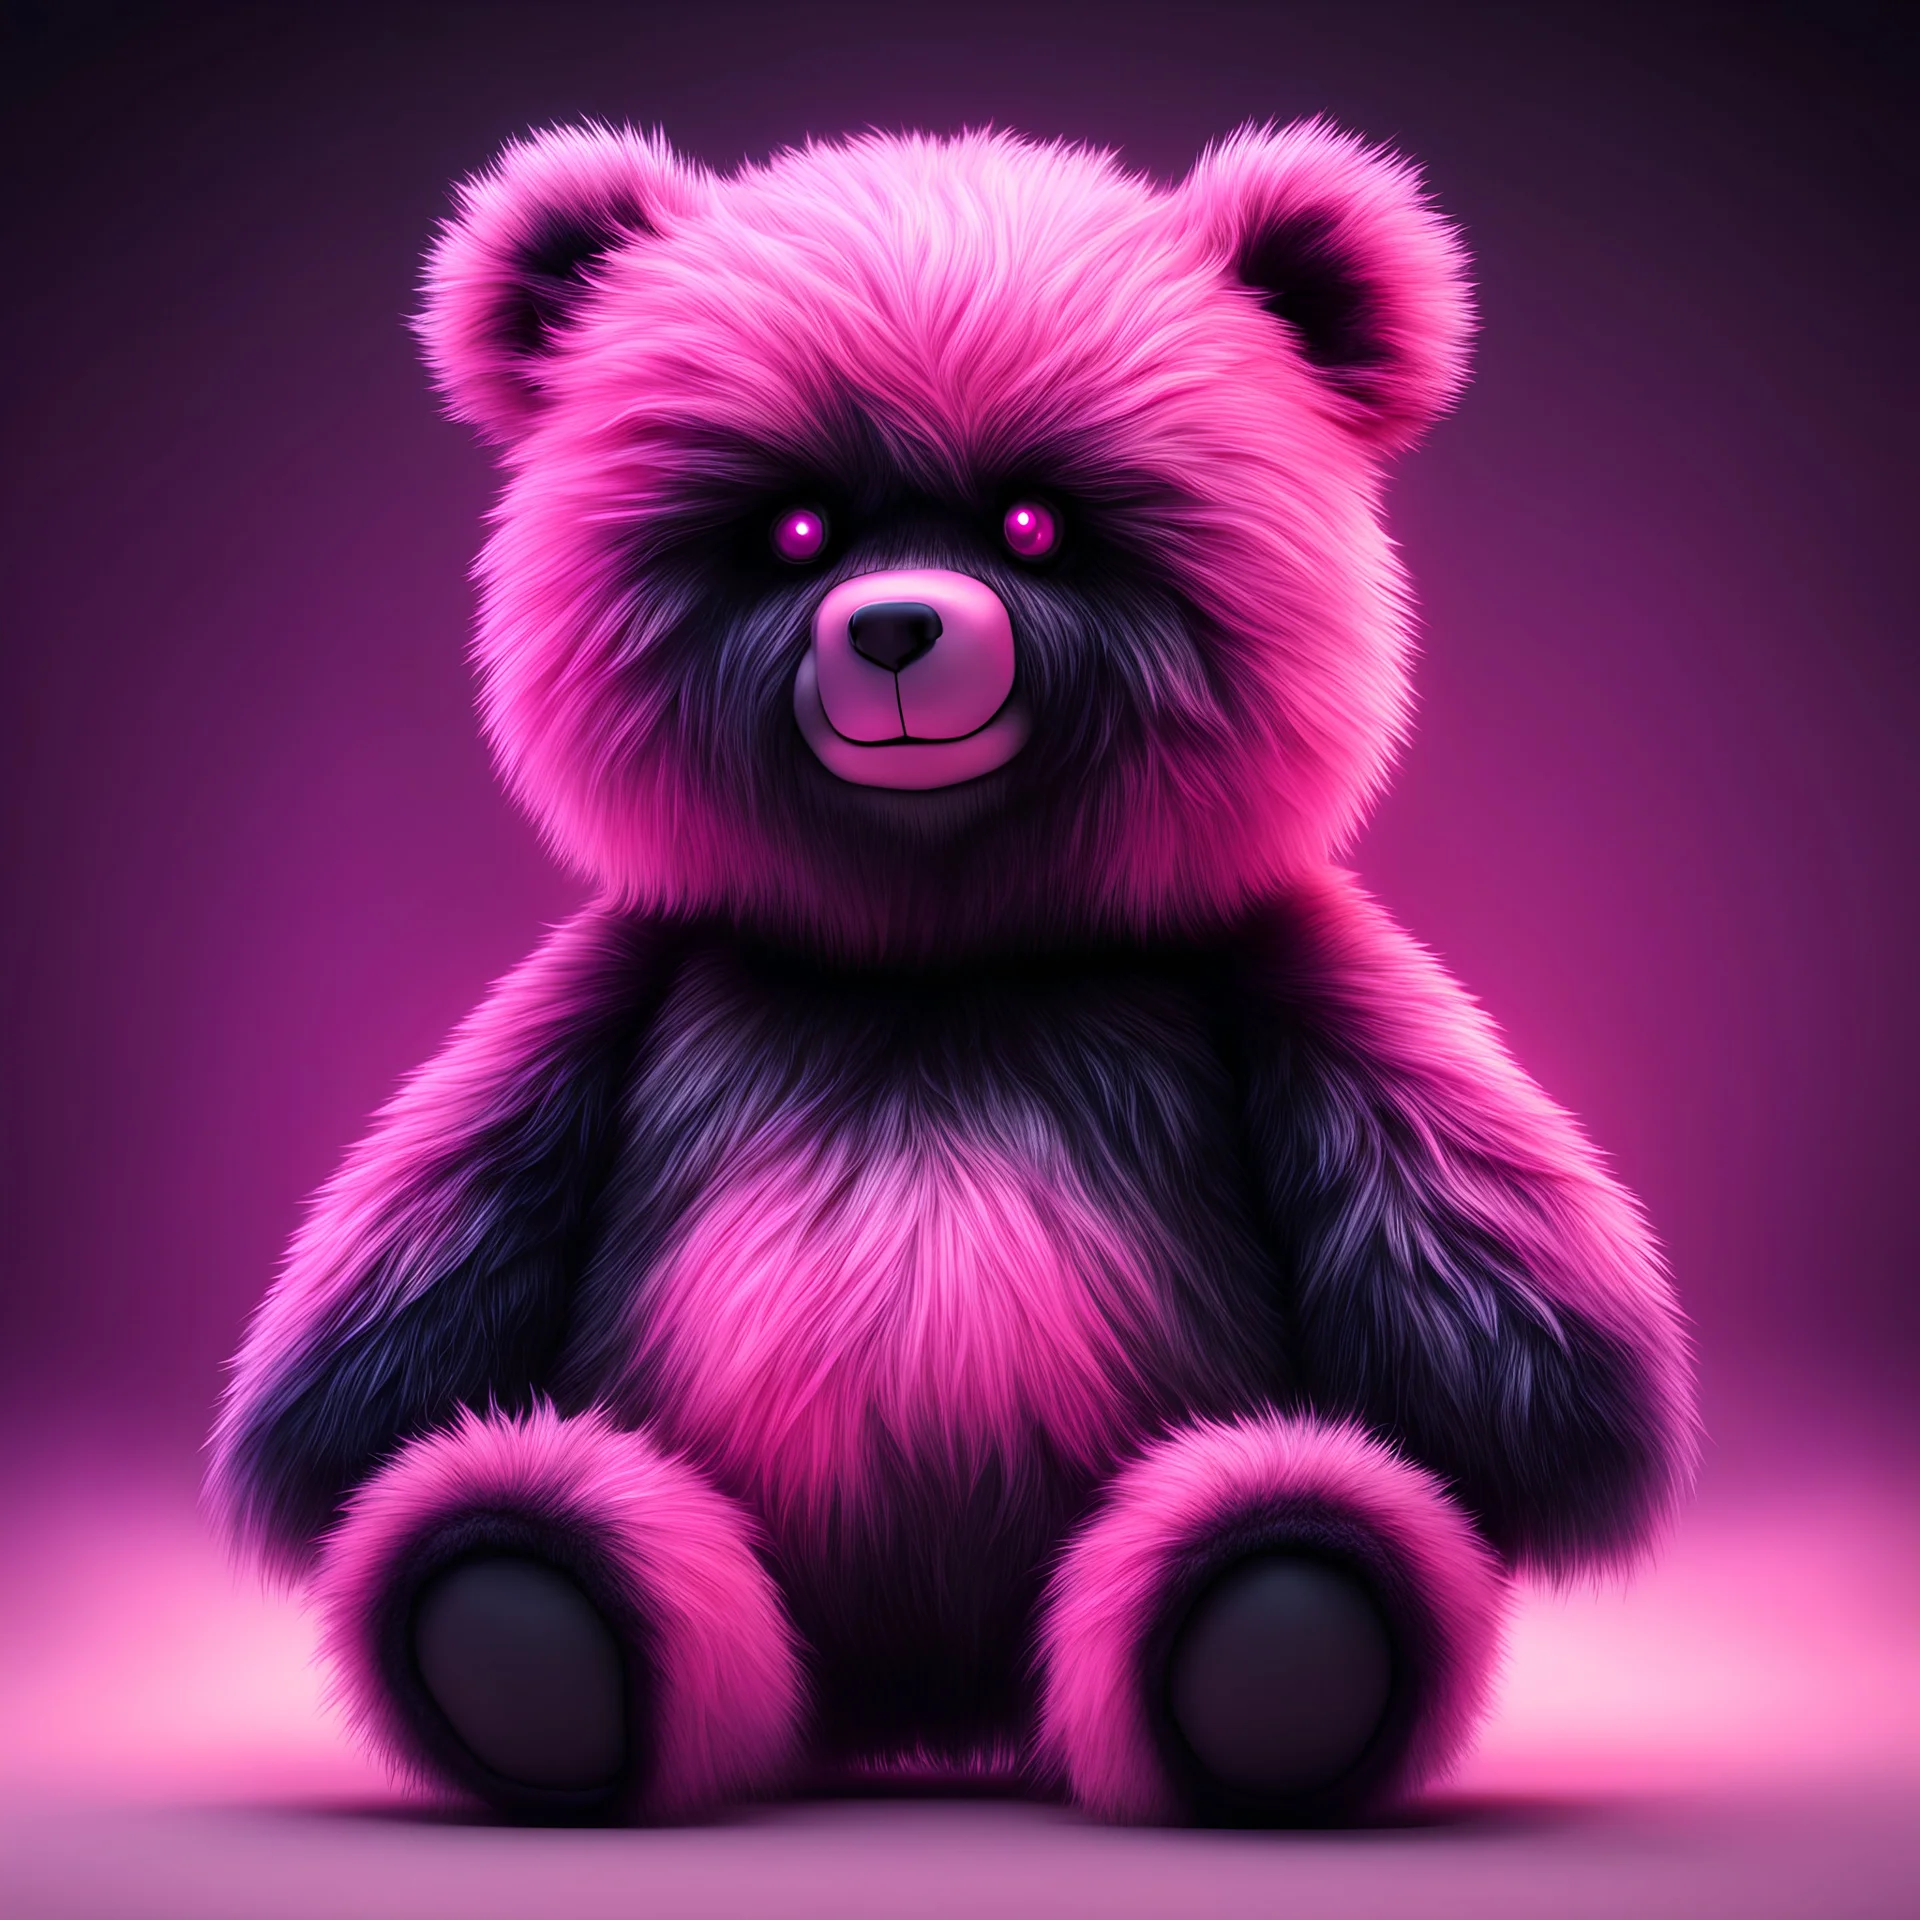 monster teddy bear with black fur and a pink head in holography art style